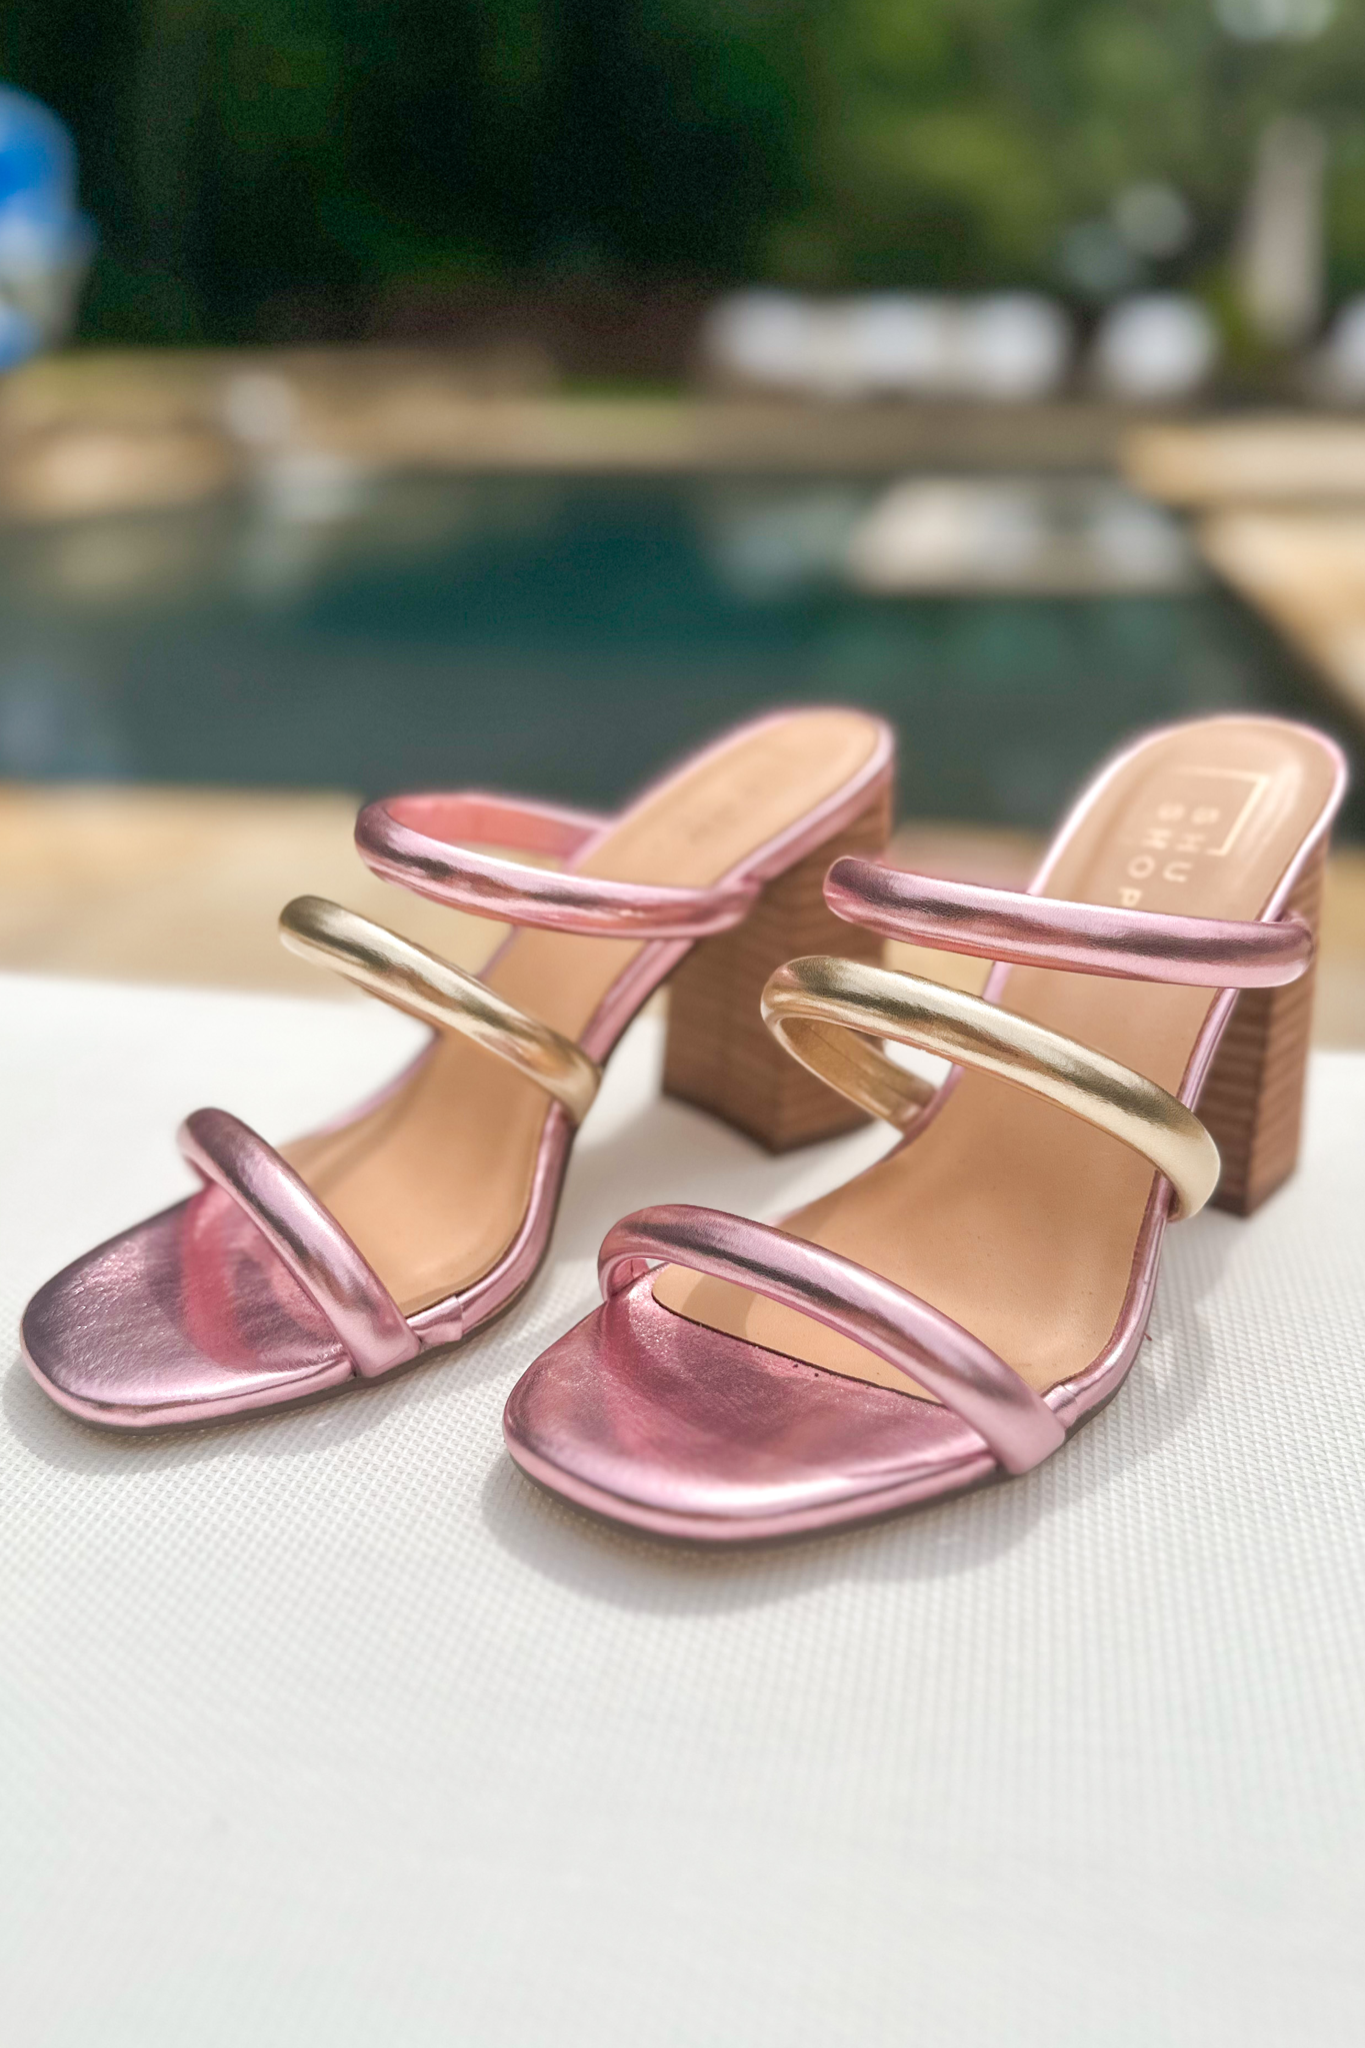 The Ginger Heels by ShuShop in Metallic Pink and Gold